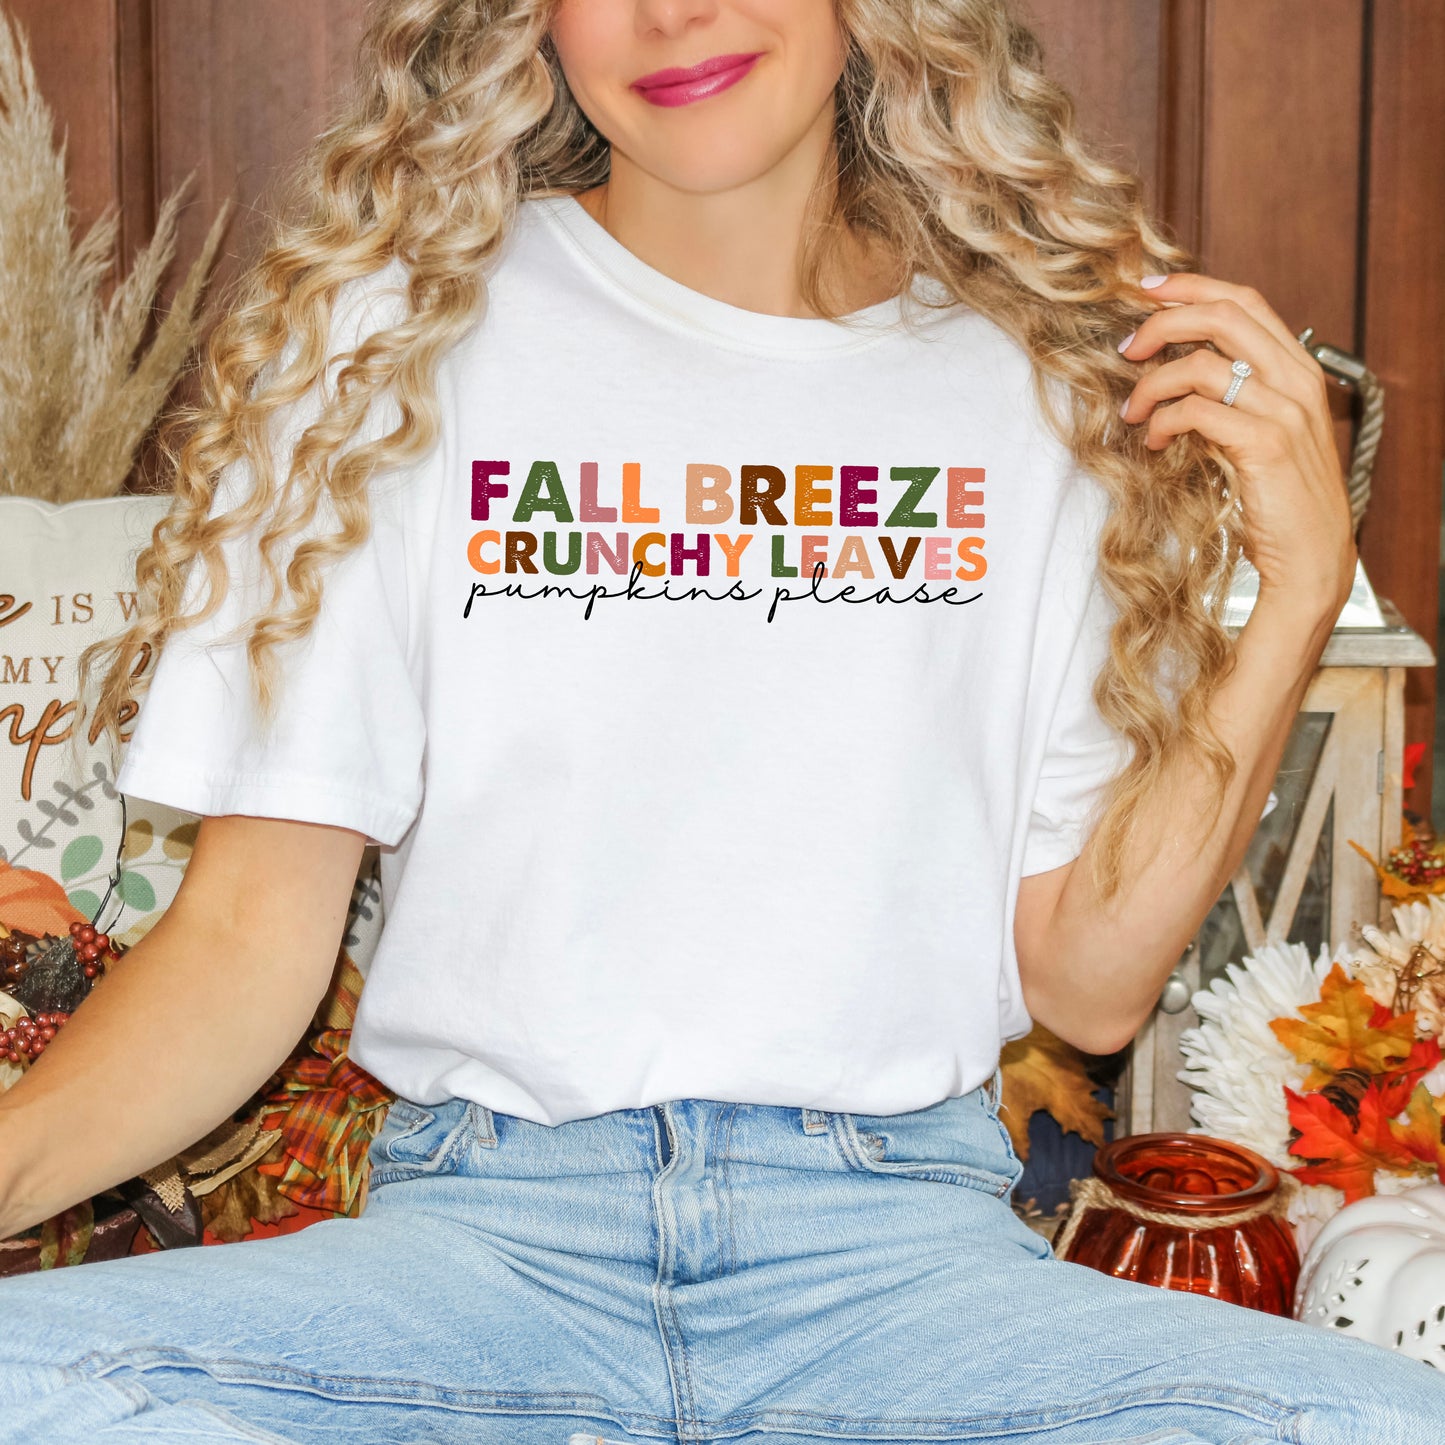 Fall Breeze Crunch Leaves Colorful | Garment Dyed Tee